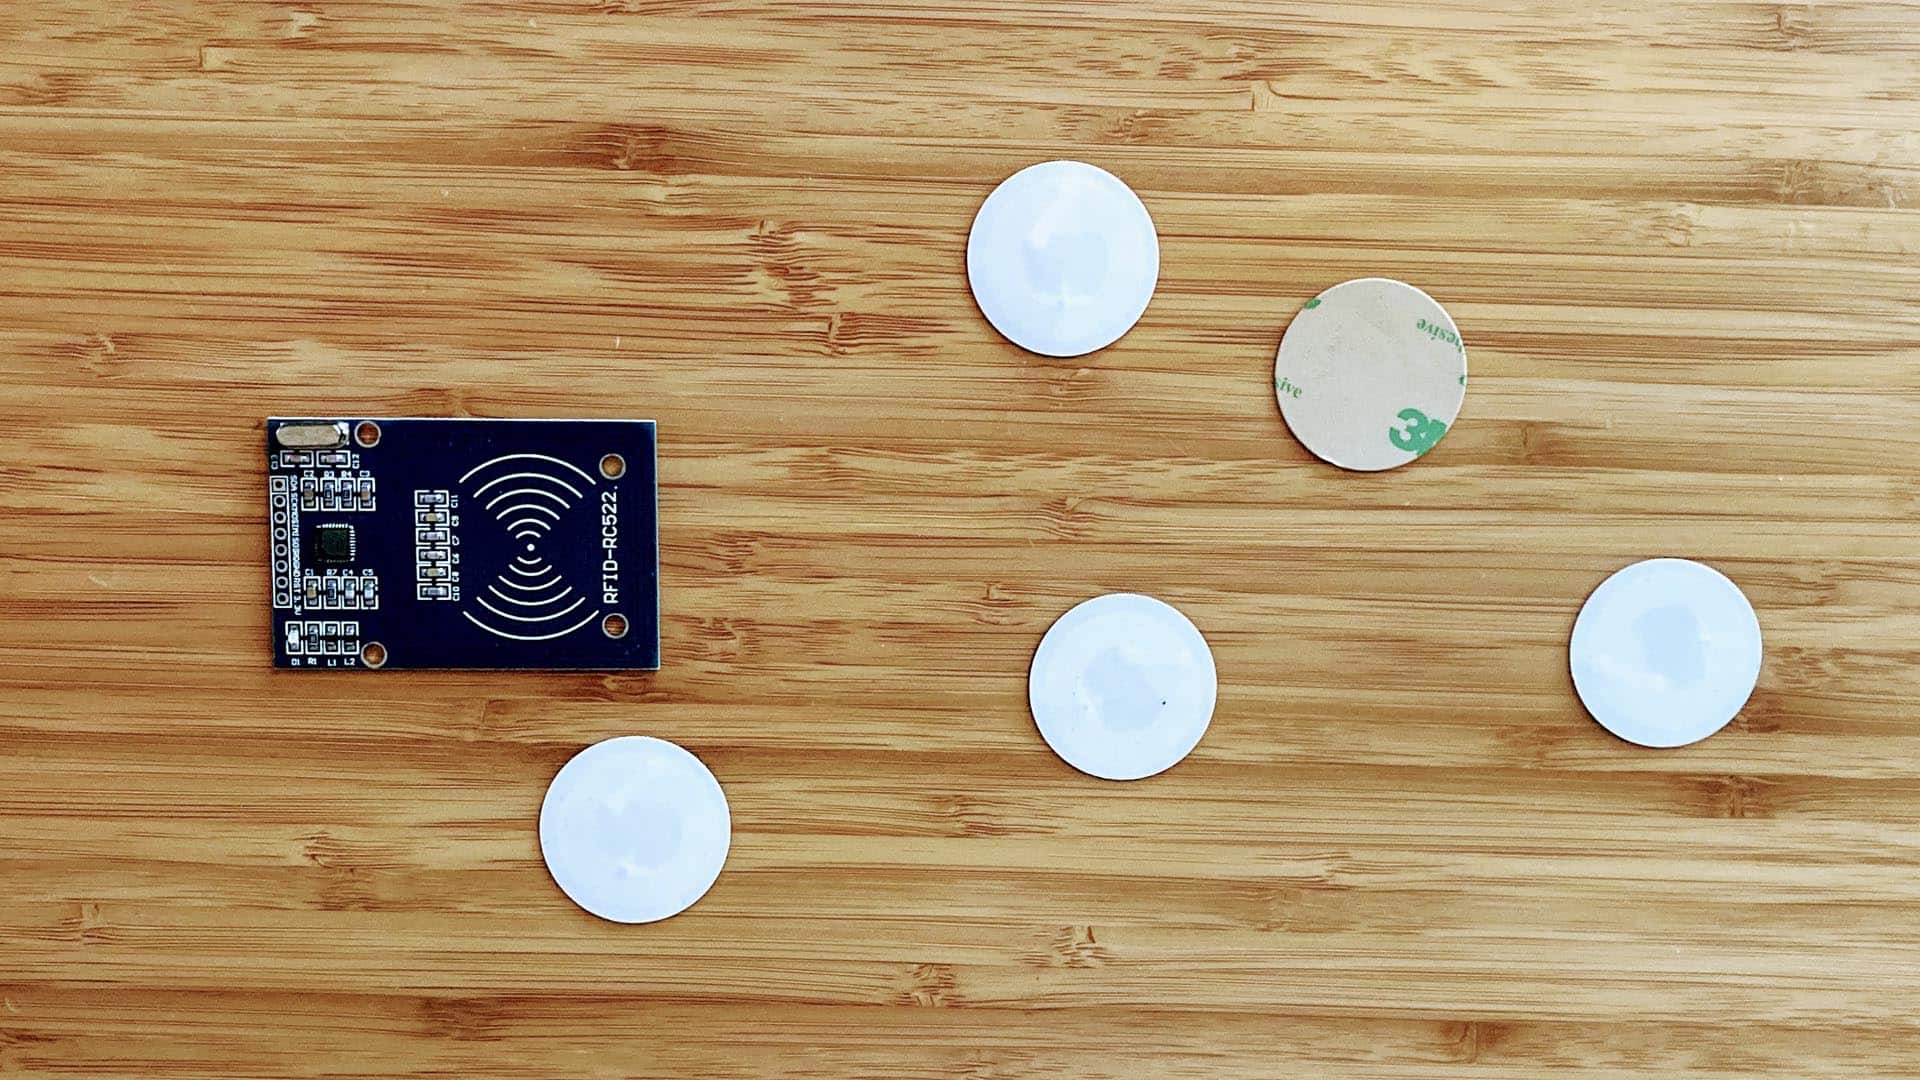 How To Use NFC Tags For Home Automation